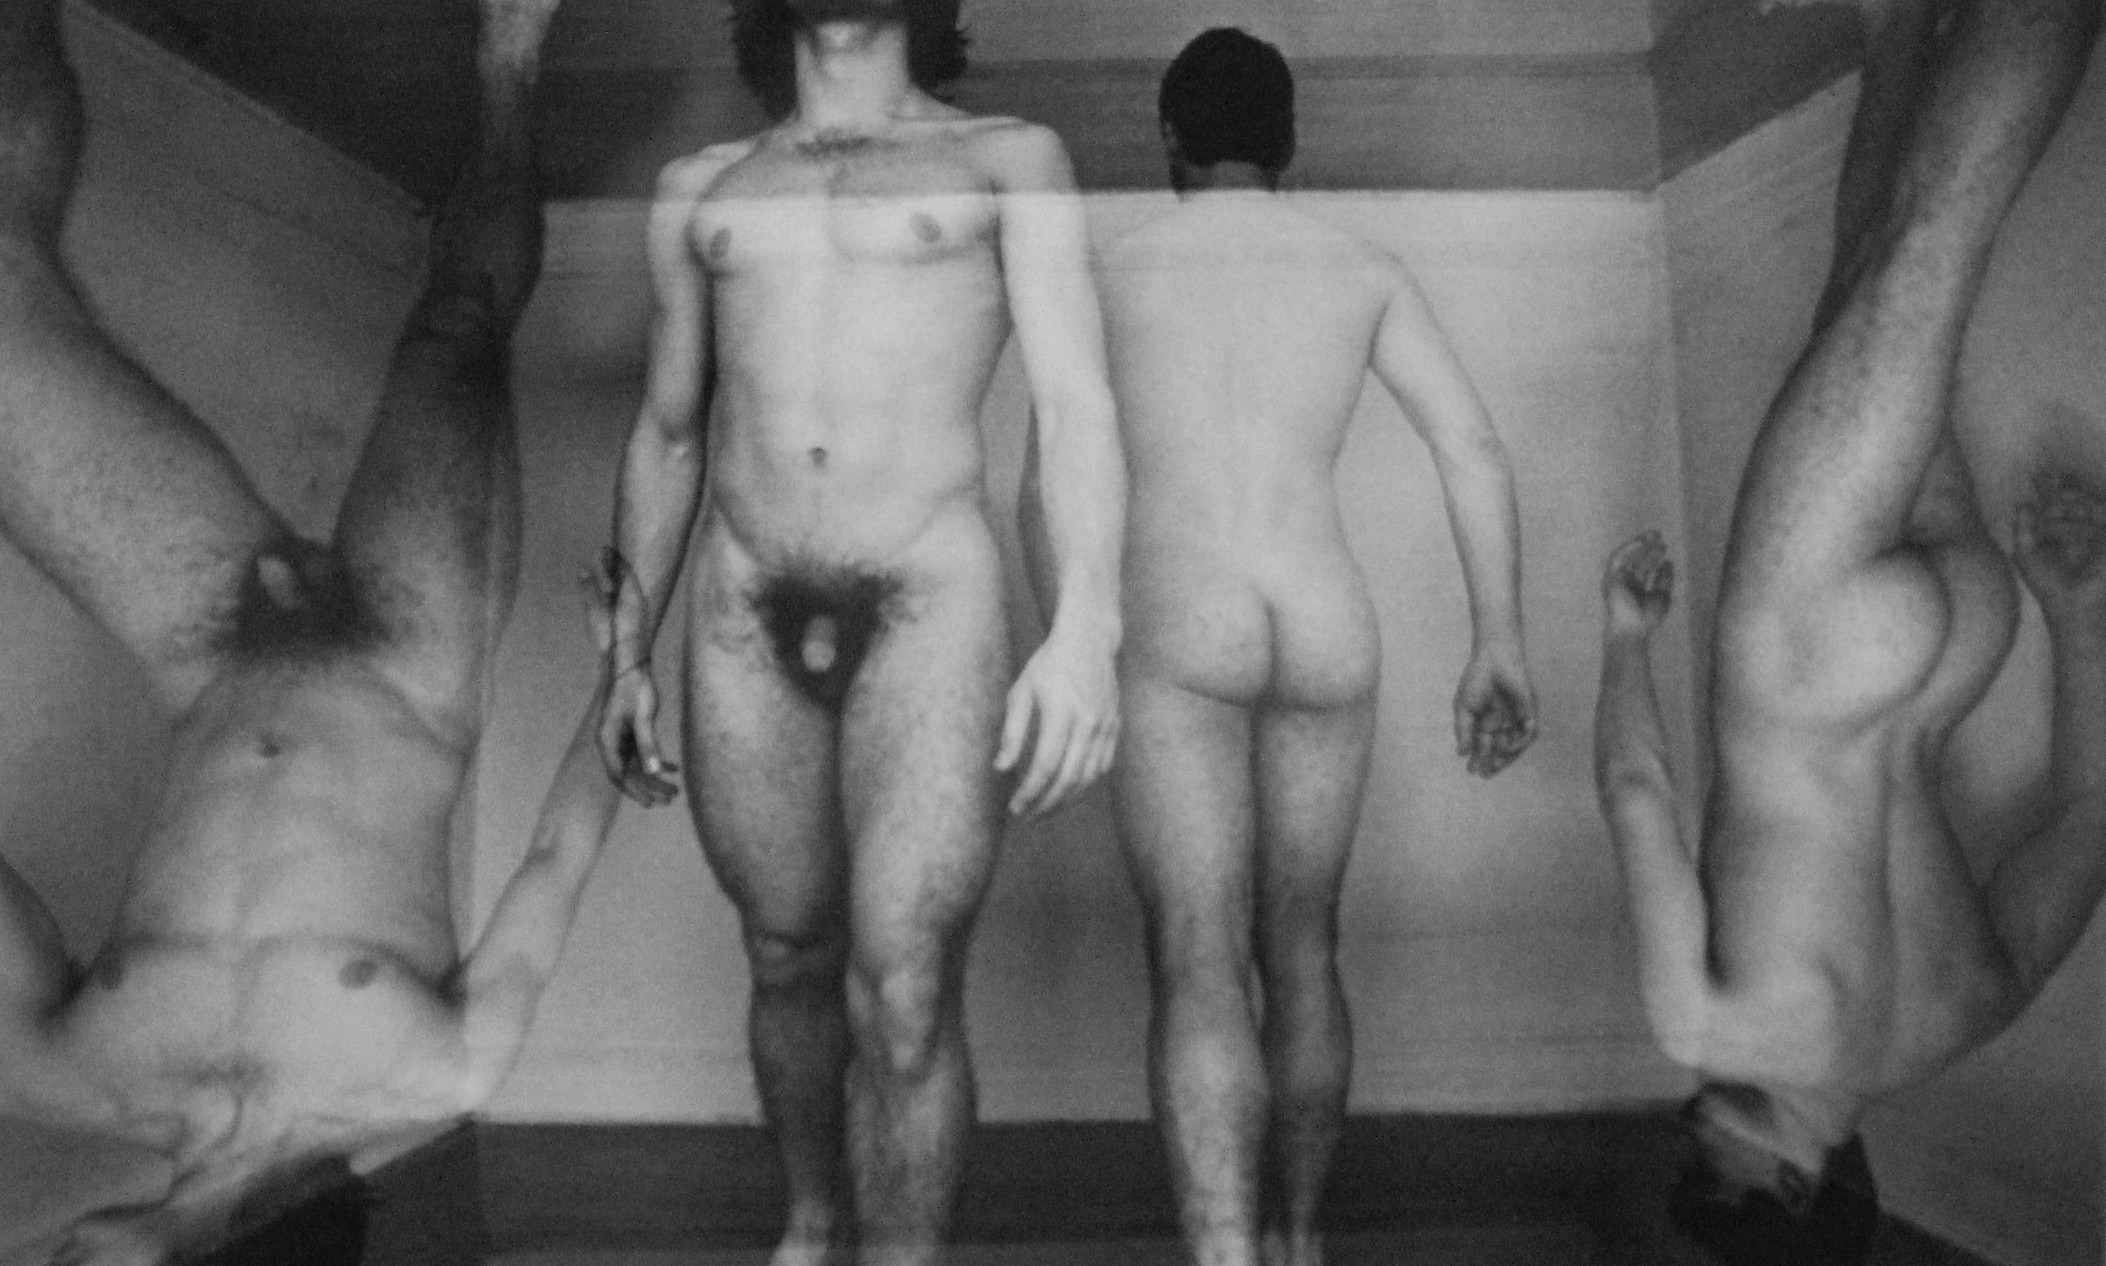 Duane Michals, Walking Men, 1960s
28 x 35,5 cm
Edition 1/25
Signed, captioned and dated by photographer recto